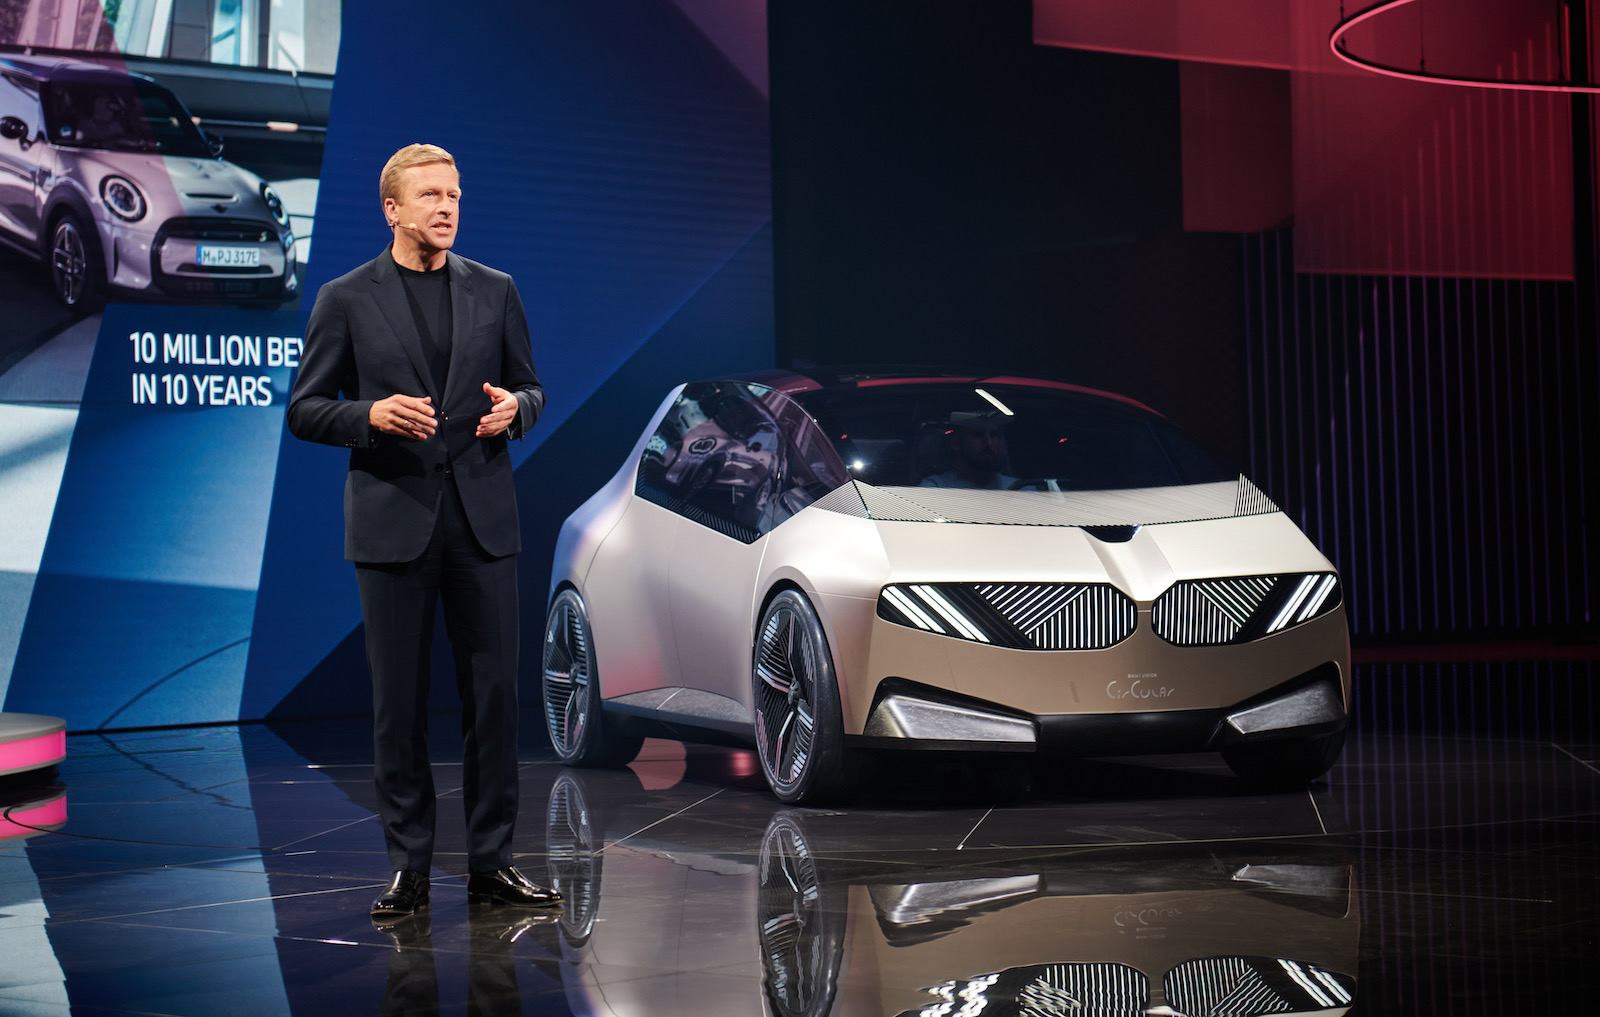 BMW: 50% electric vehicles by 2030, debuts i Vision Circular concept